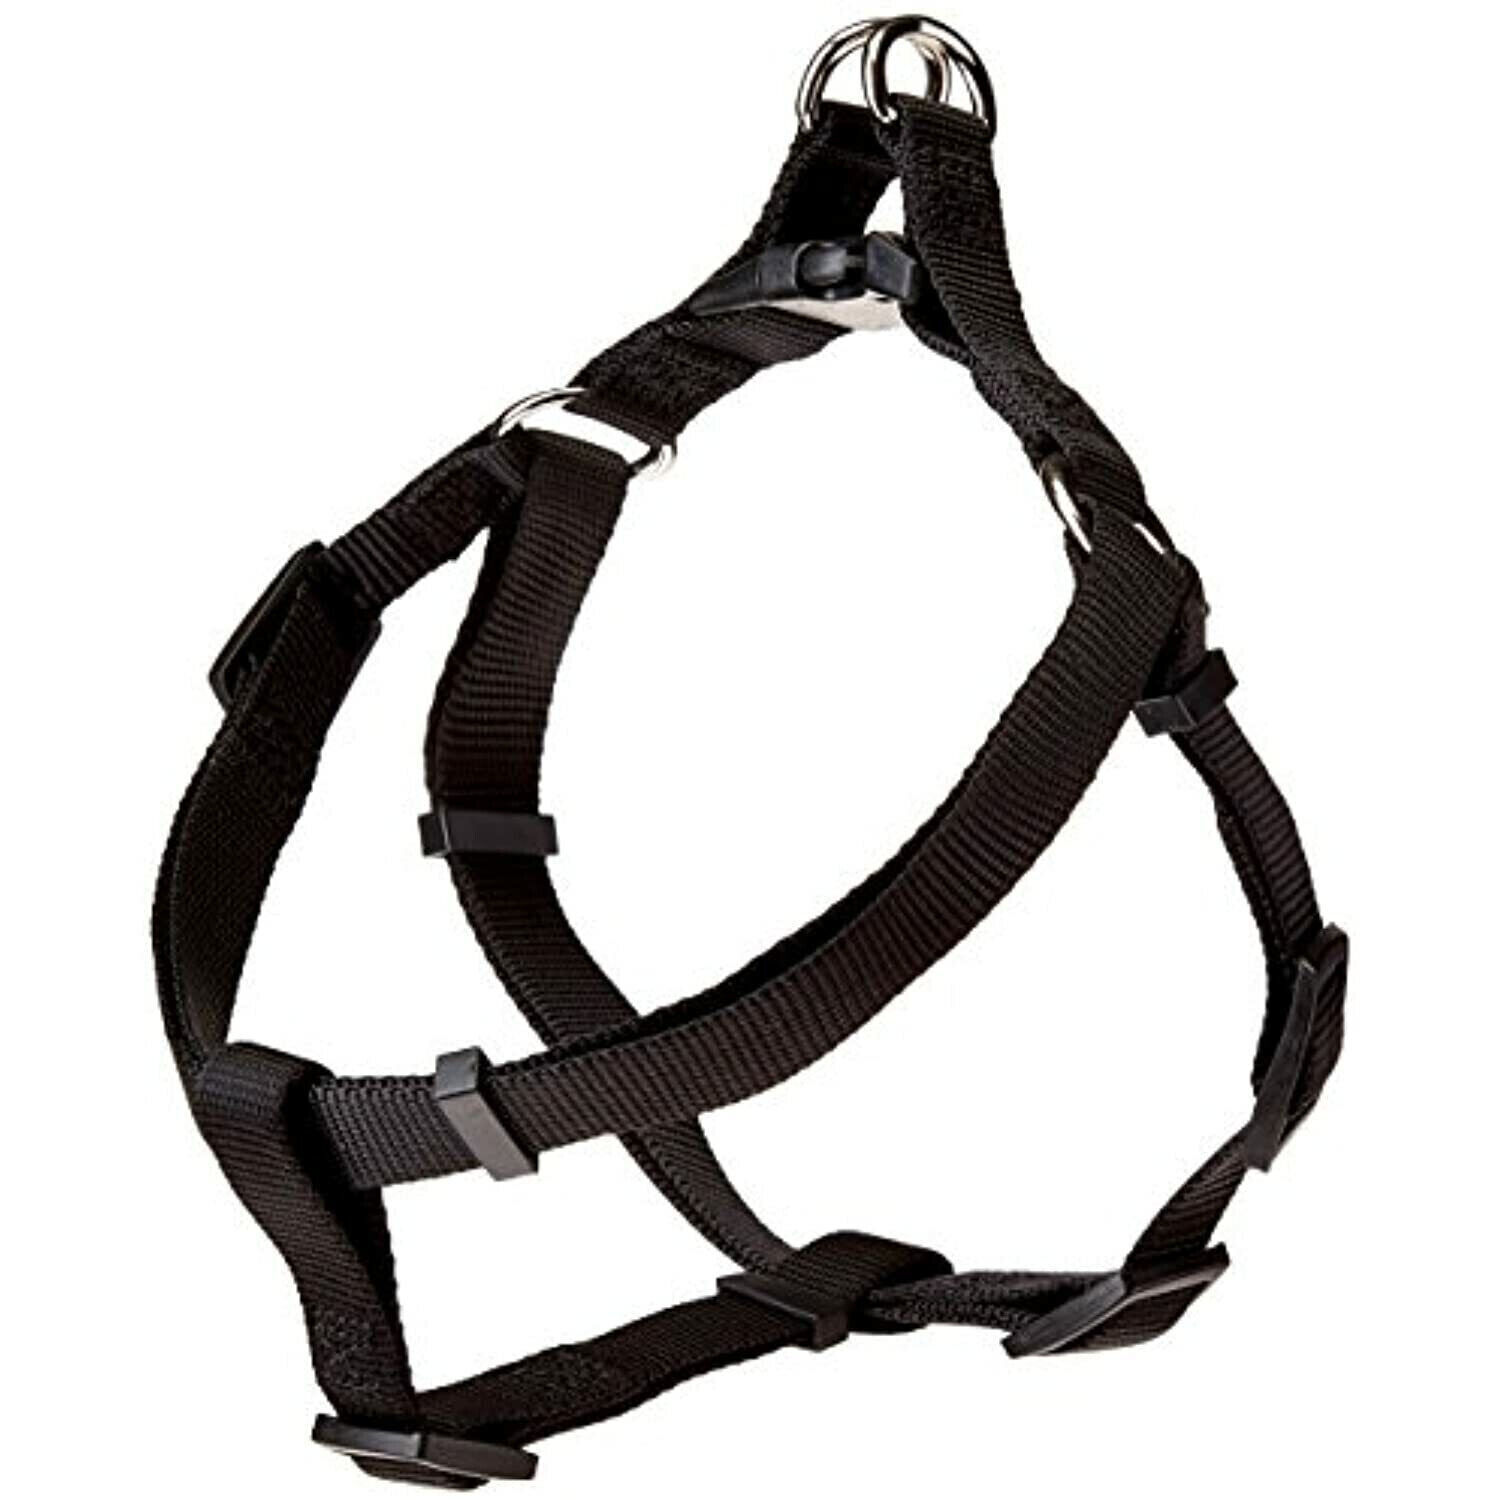 PETMATE ~ 11236 Step-in Harness, 3/4-Inch by 18-29-Inch, Black - $18.99